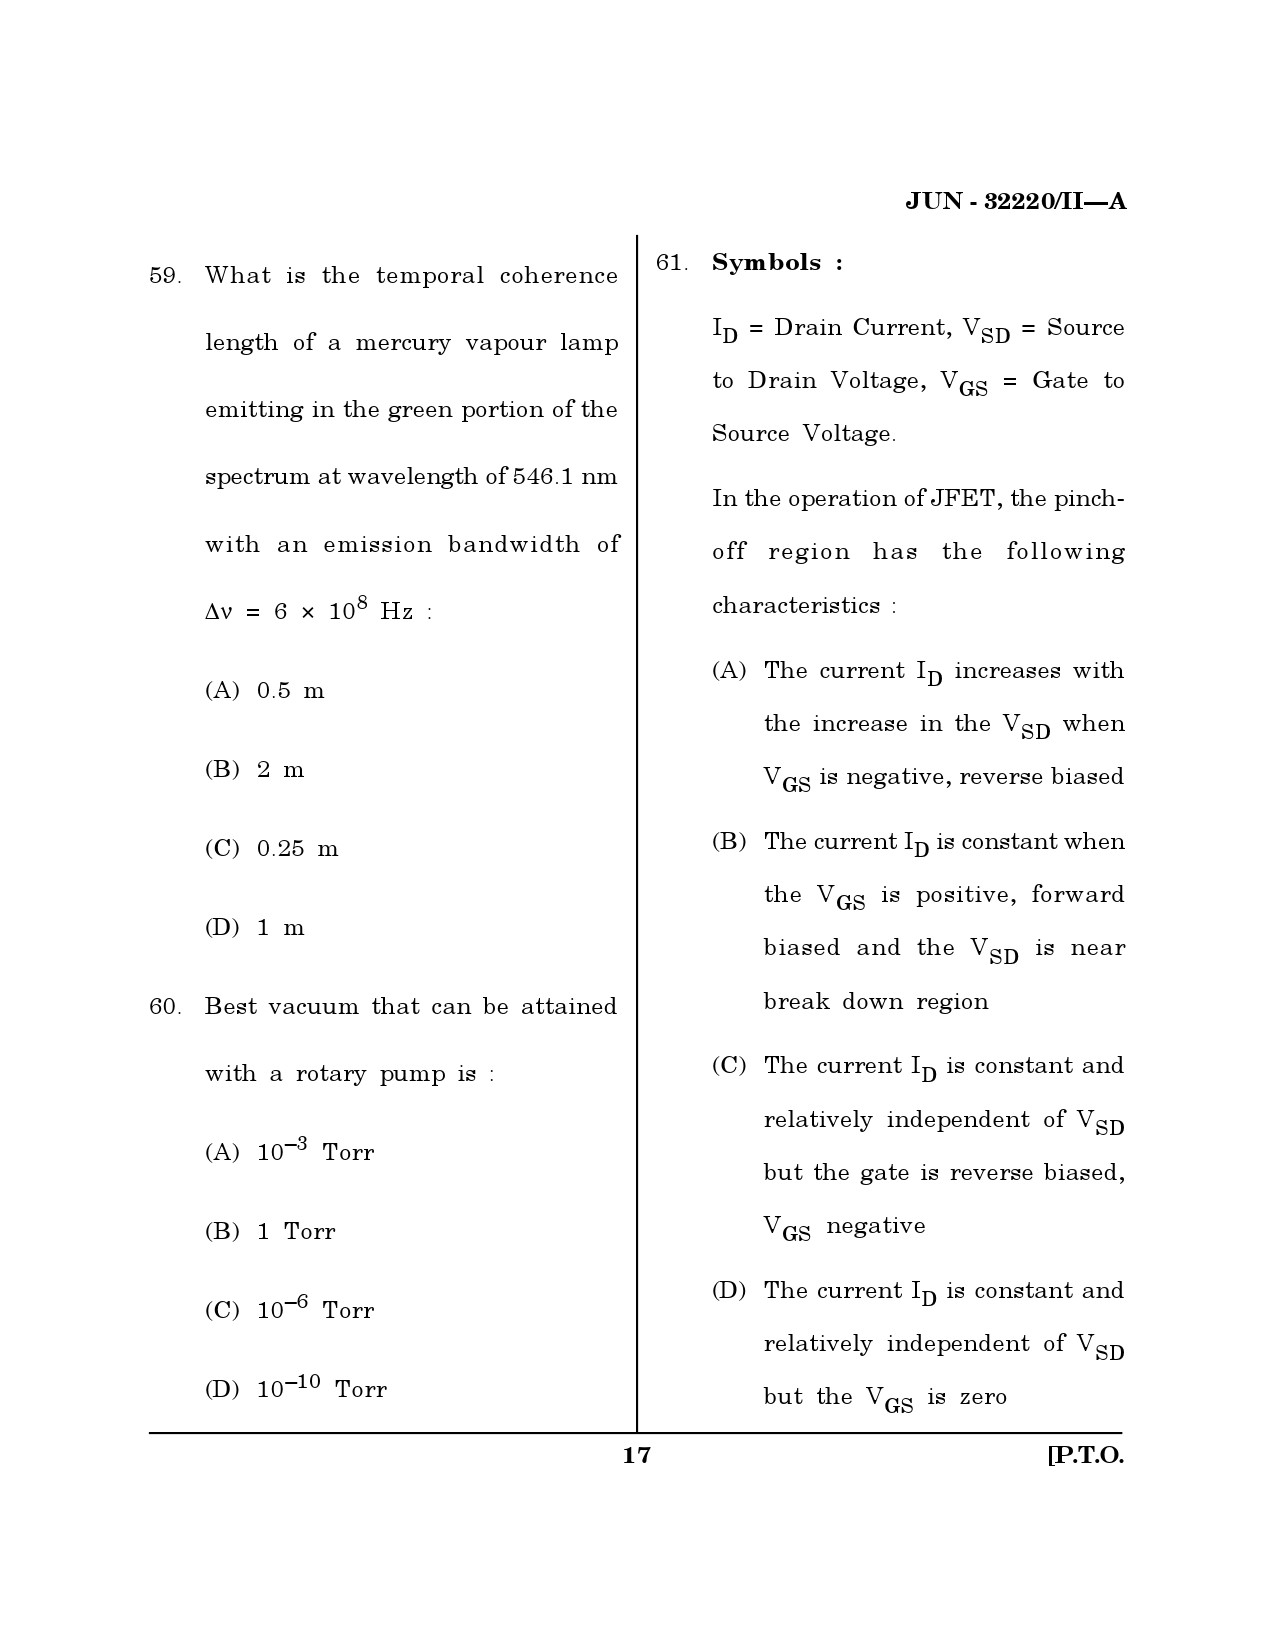 Maharashtra SET Physical Science Question Paper II June 2020 16